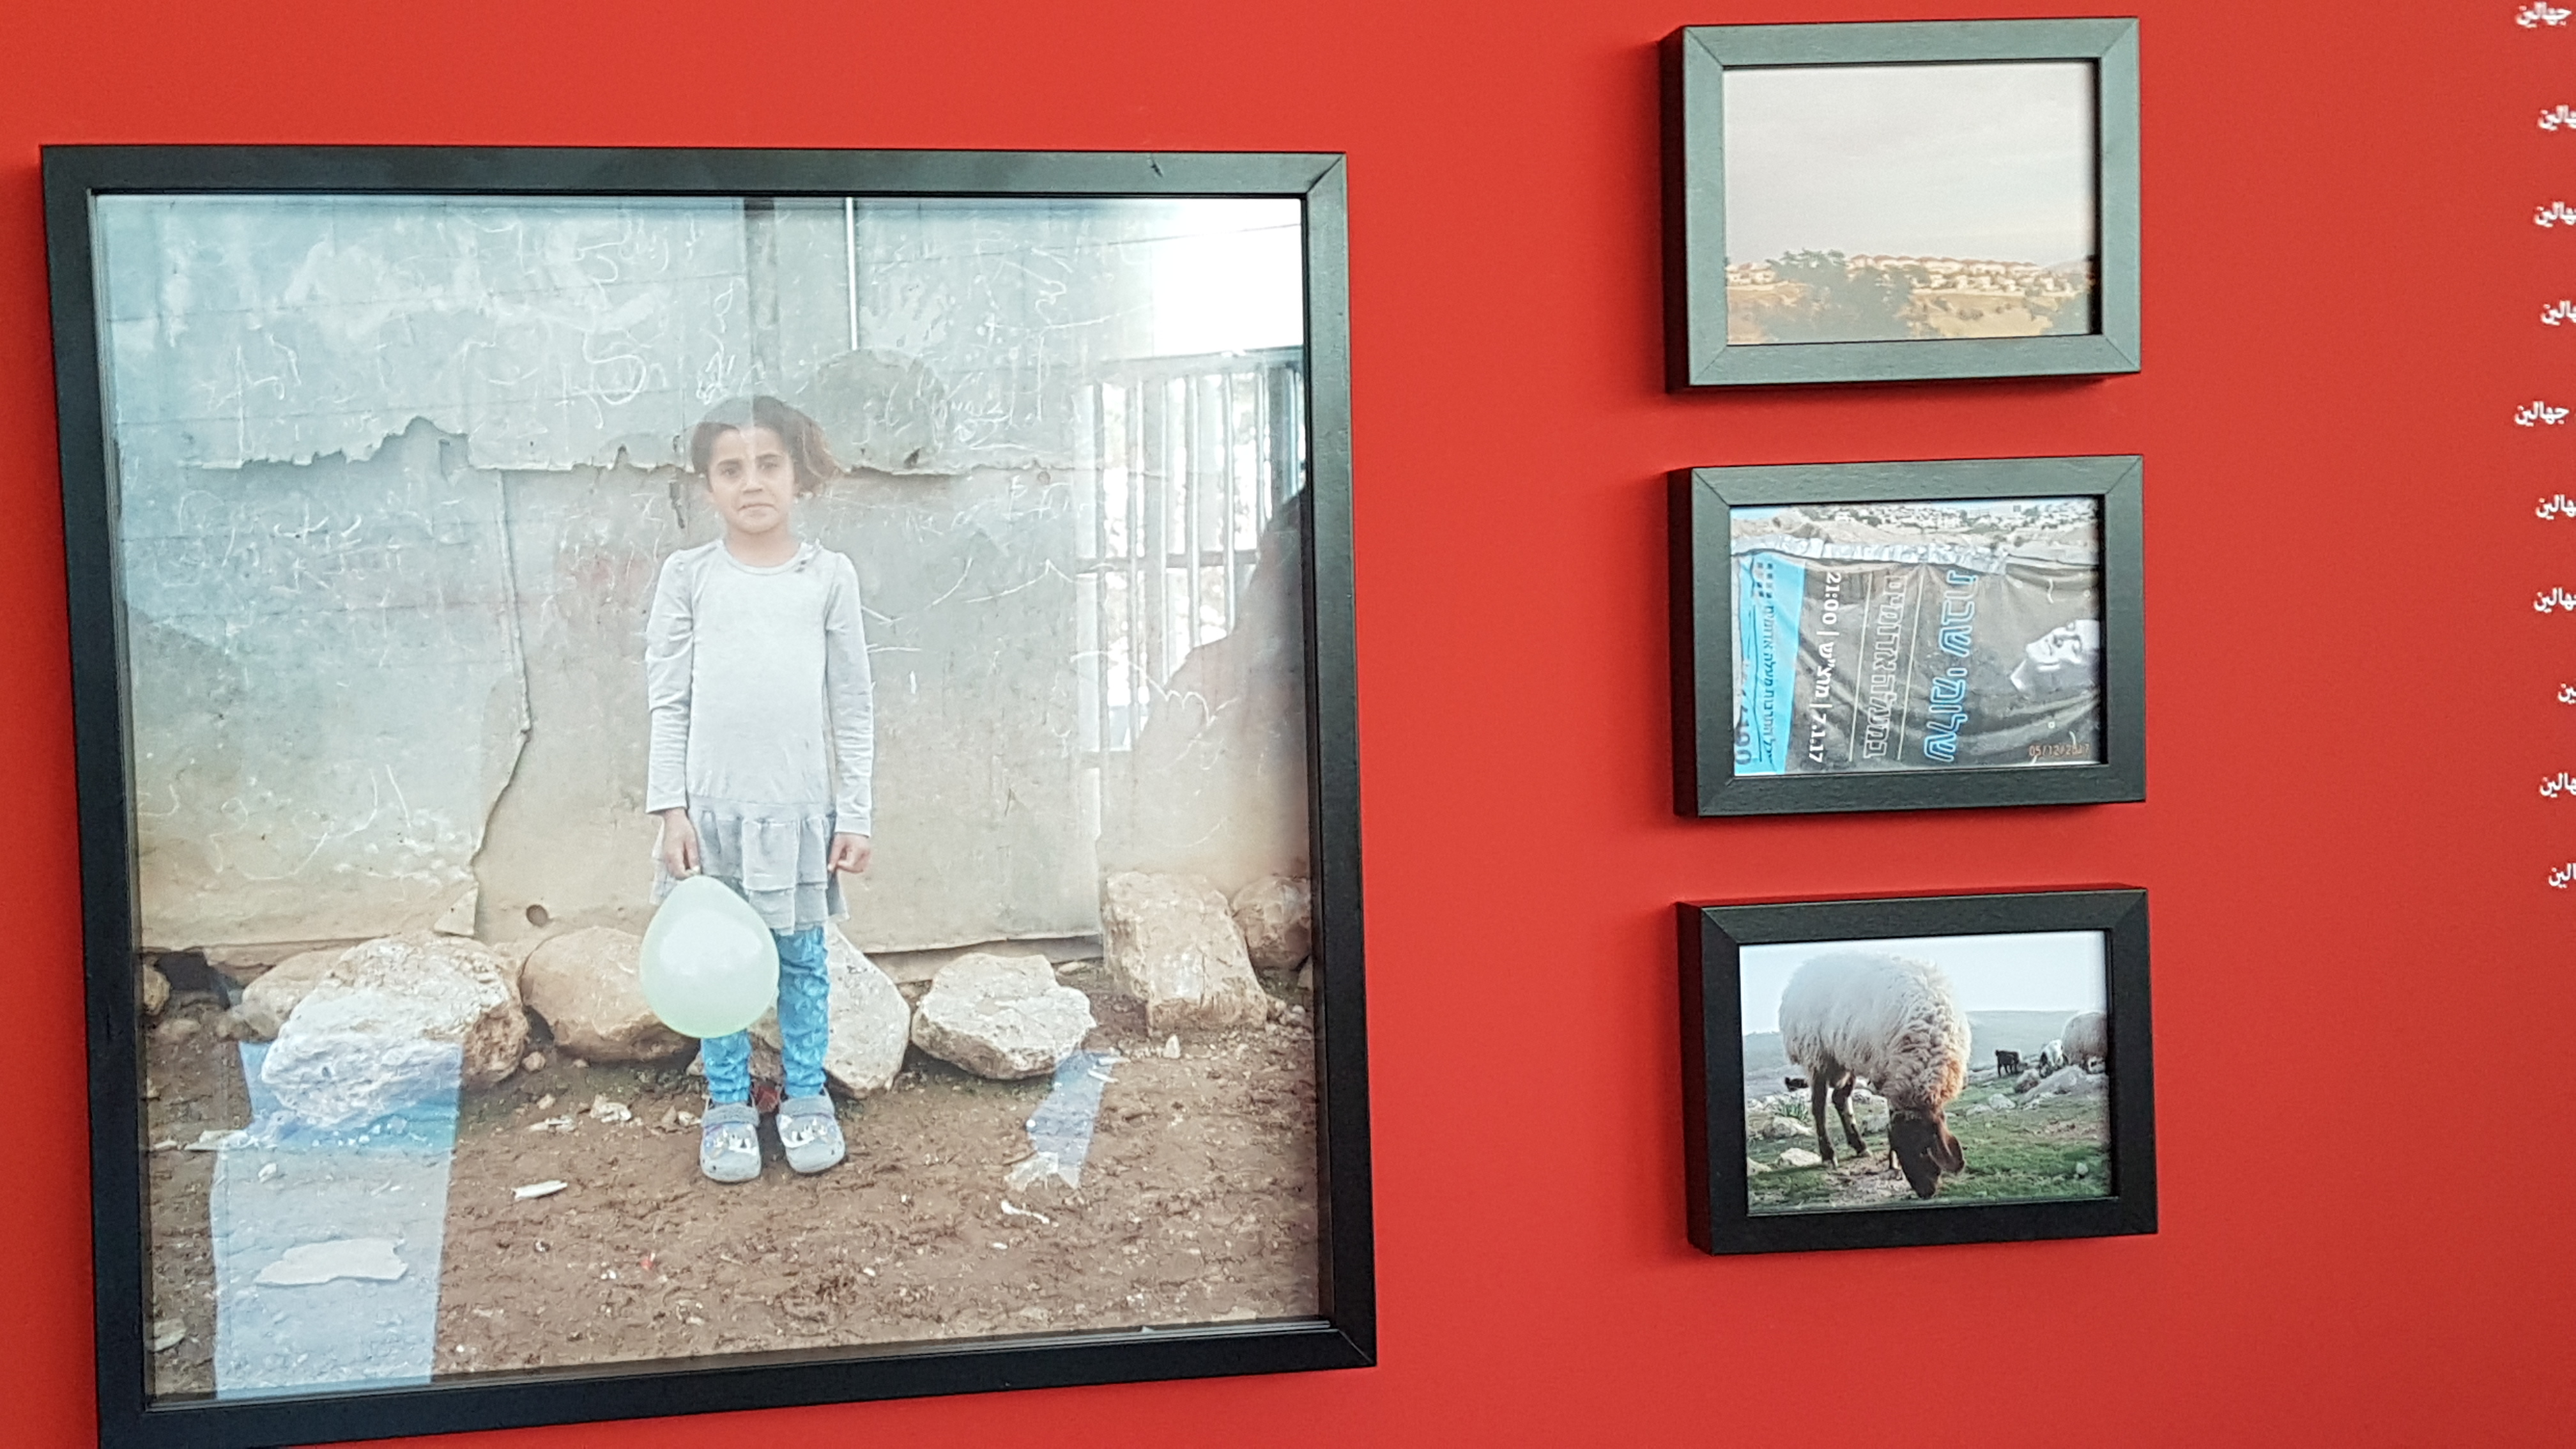 An exhibition featuring the works of Abu Al-Anwar village's children and other Bedouin gatherings